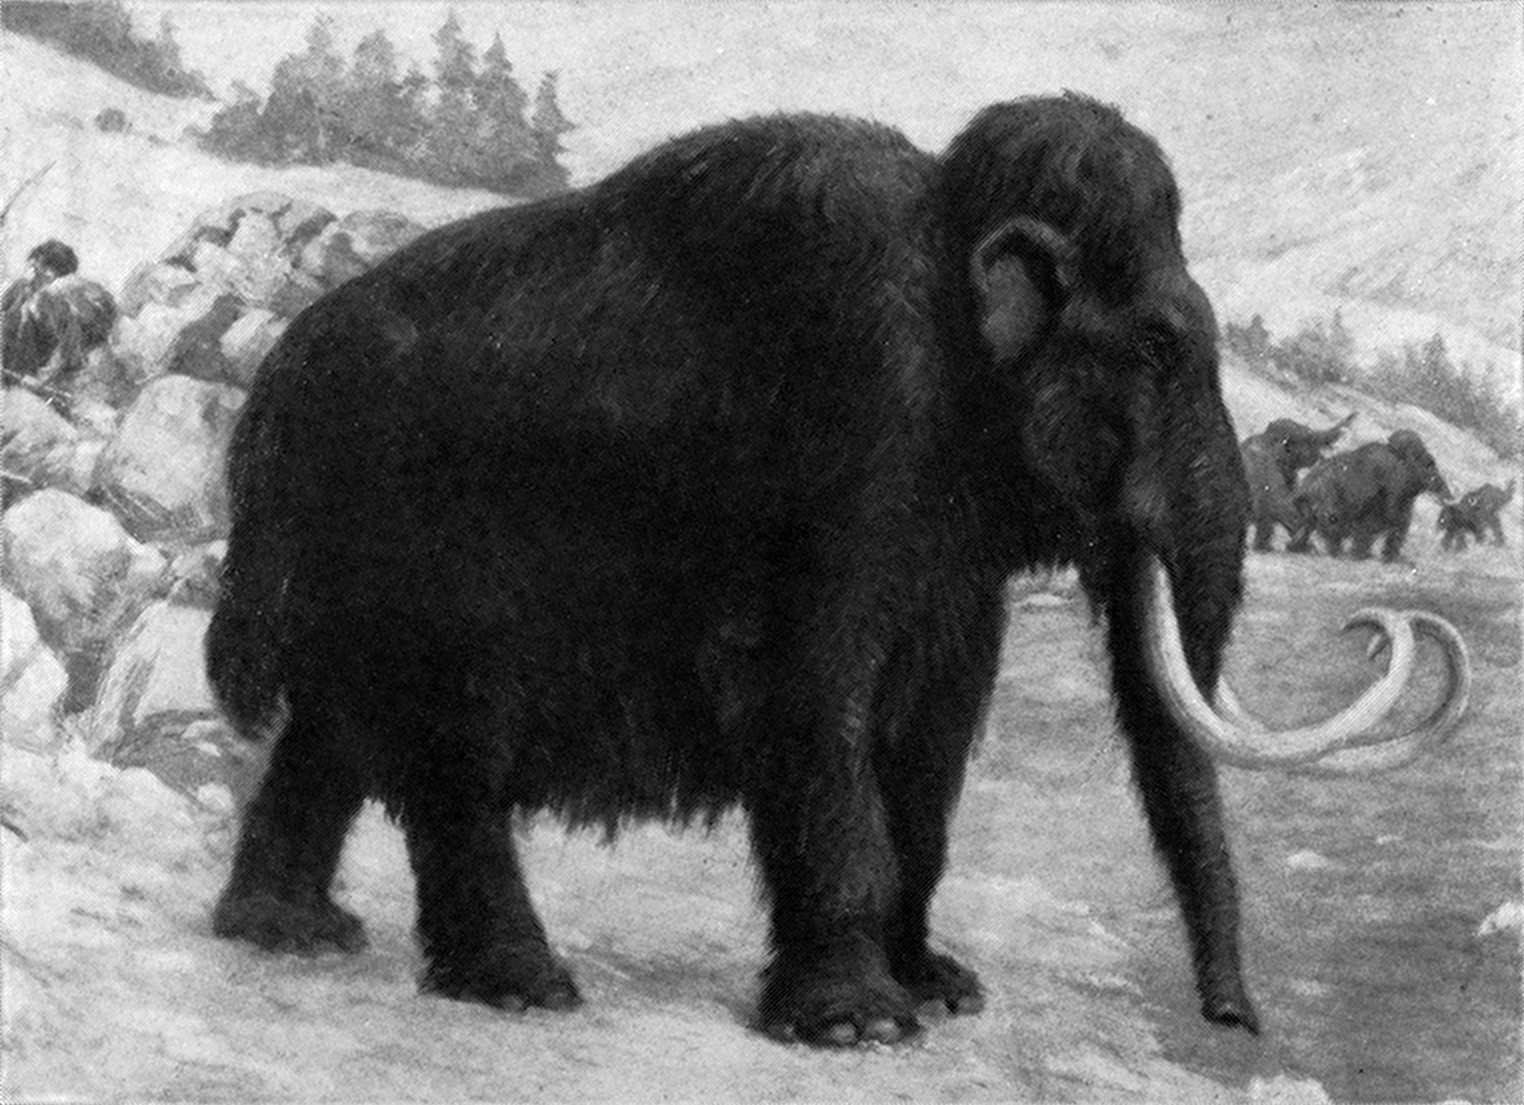 Jurassic Park Be Damned – A Biotech Startup Wants to Bring Back the Woolly Mammoth